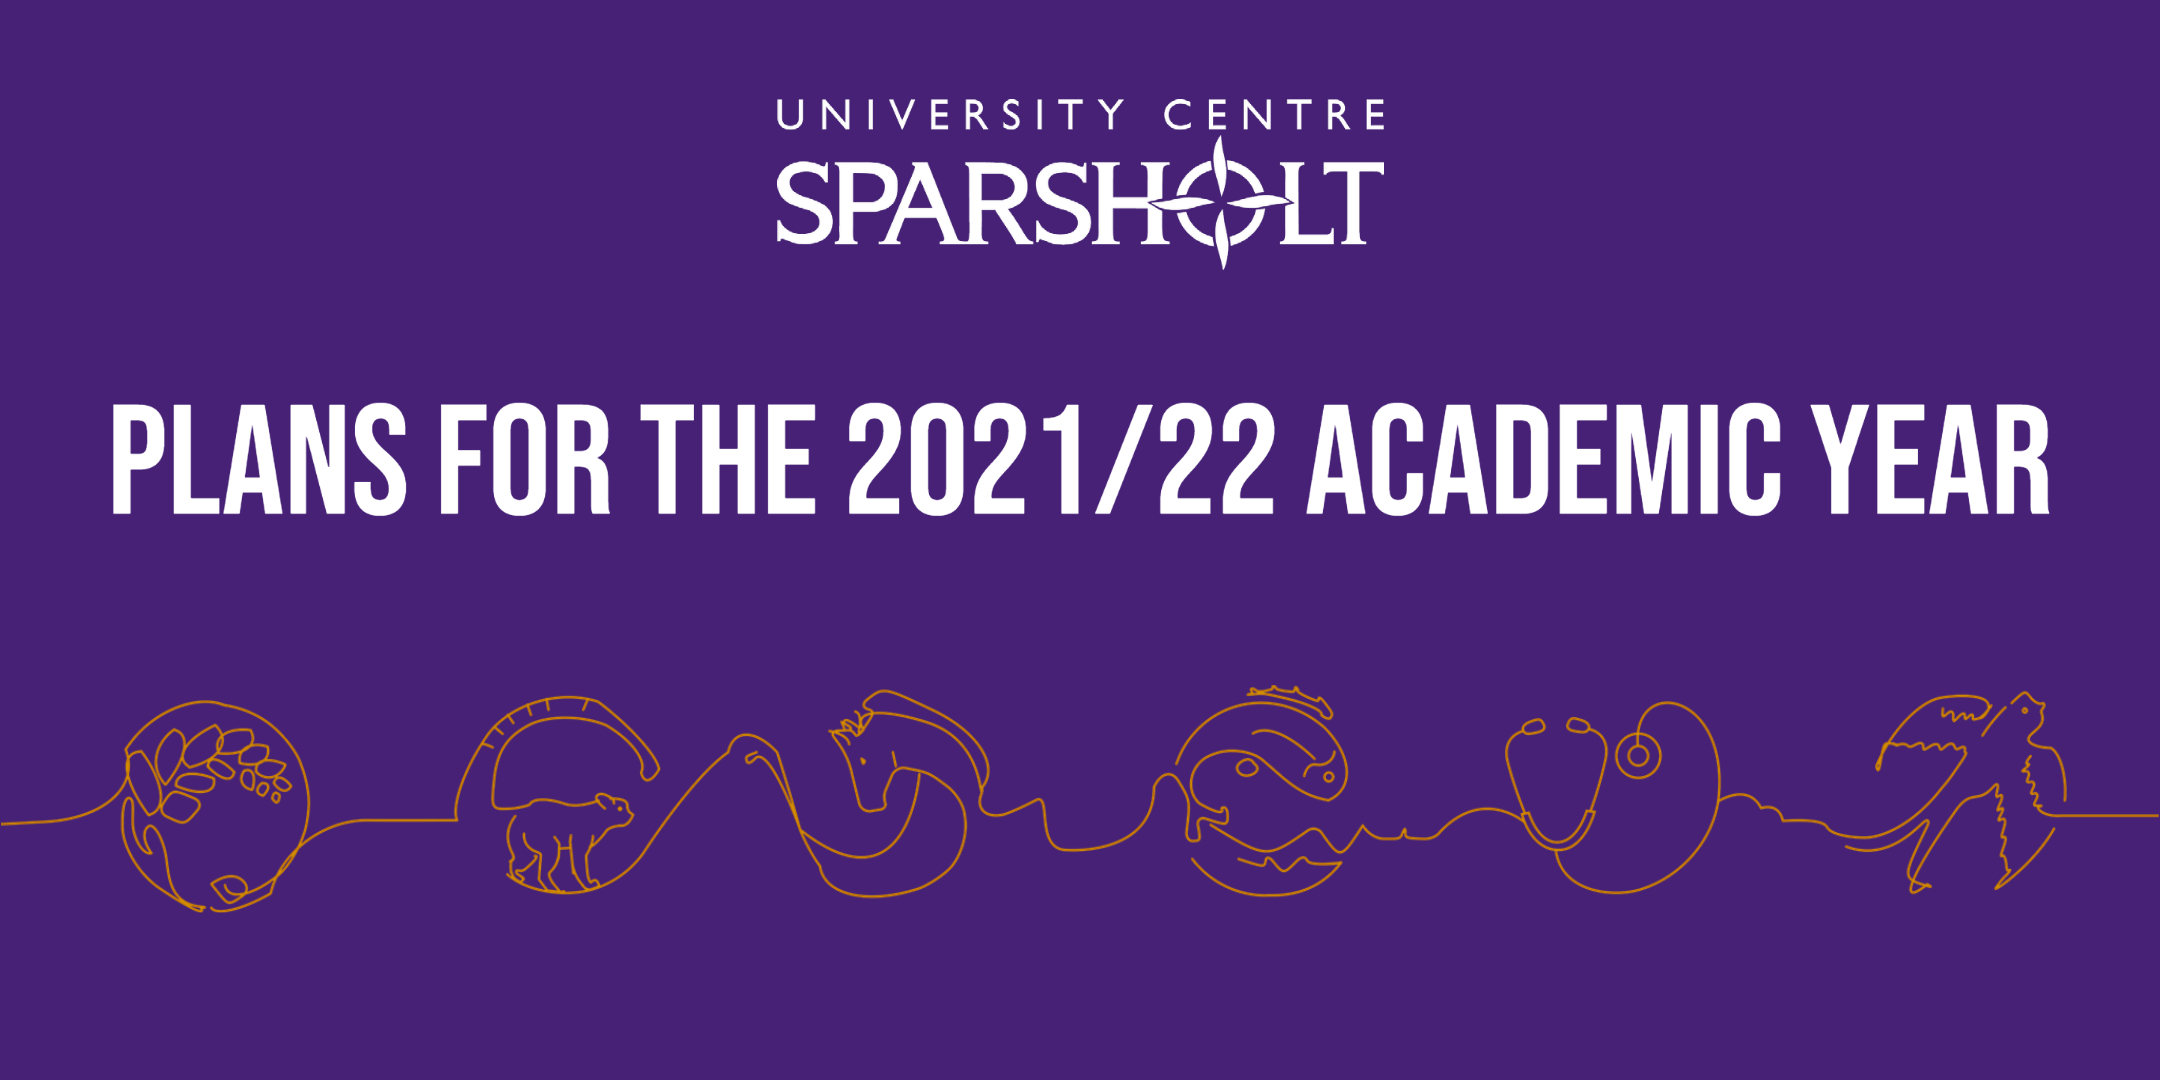 UNIVERSITY CENTRE SPARSHOLT PLANS FOR THE 2021/22 ACADEMIC YEAR